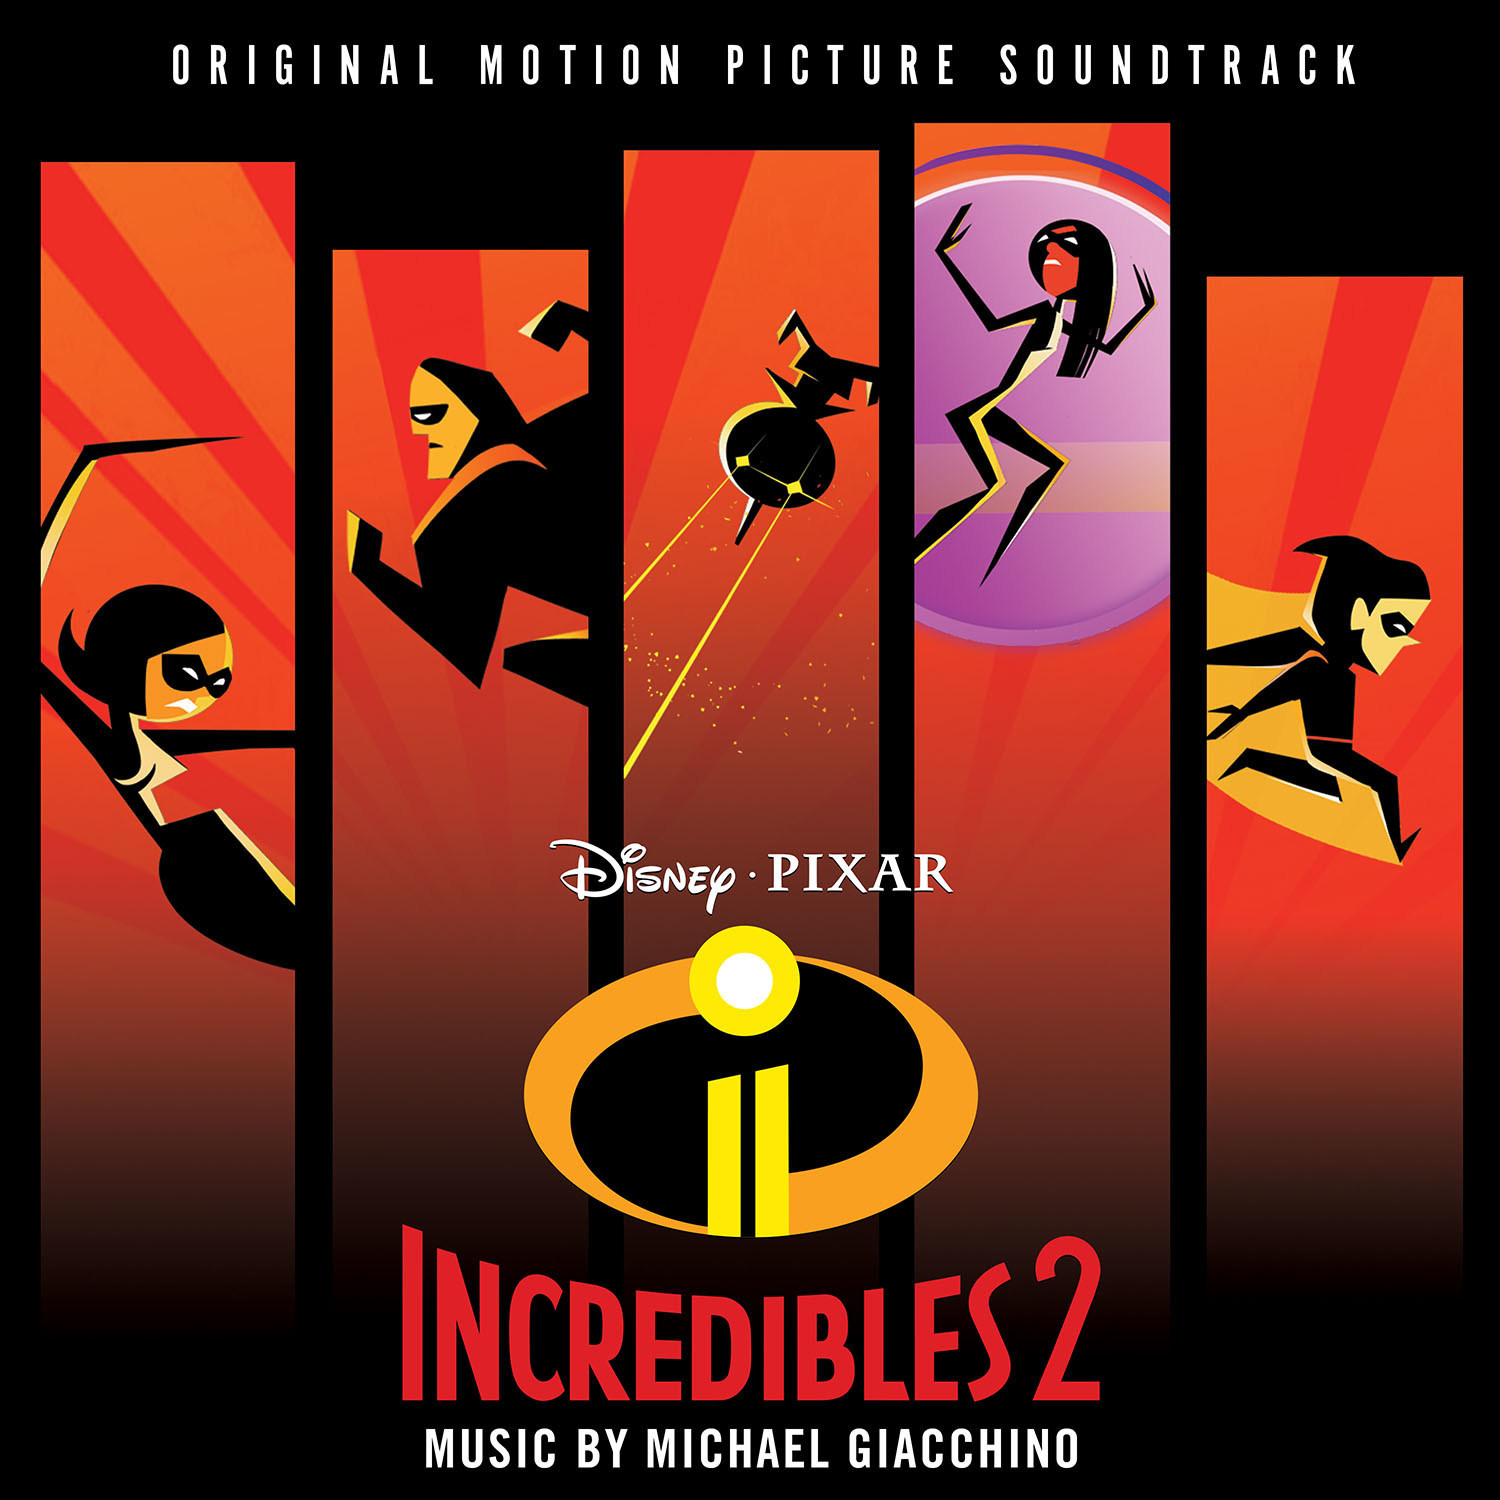 Disney Pixar S Incredibles 2 Soundtrack Featuring Score By Oscar Winning Composer Michael Giacchino Available Now Thisfunktional